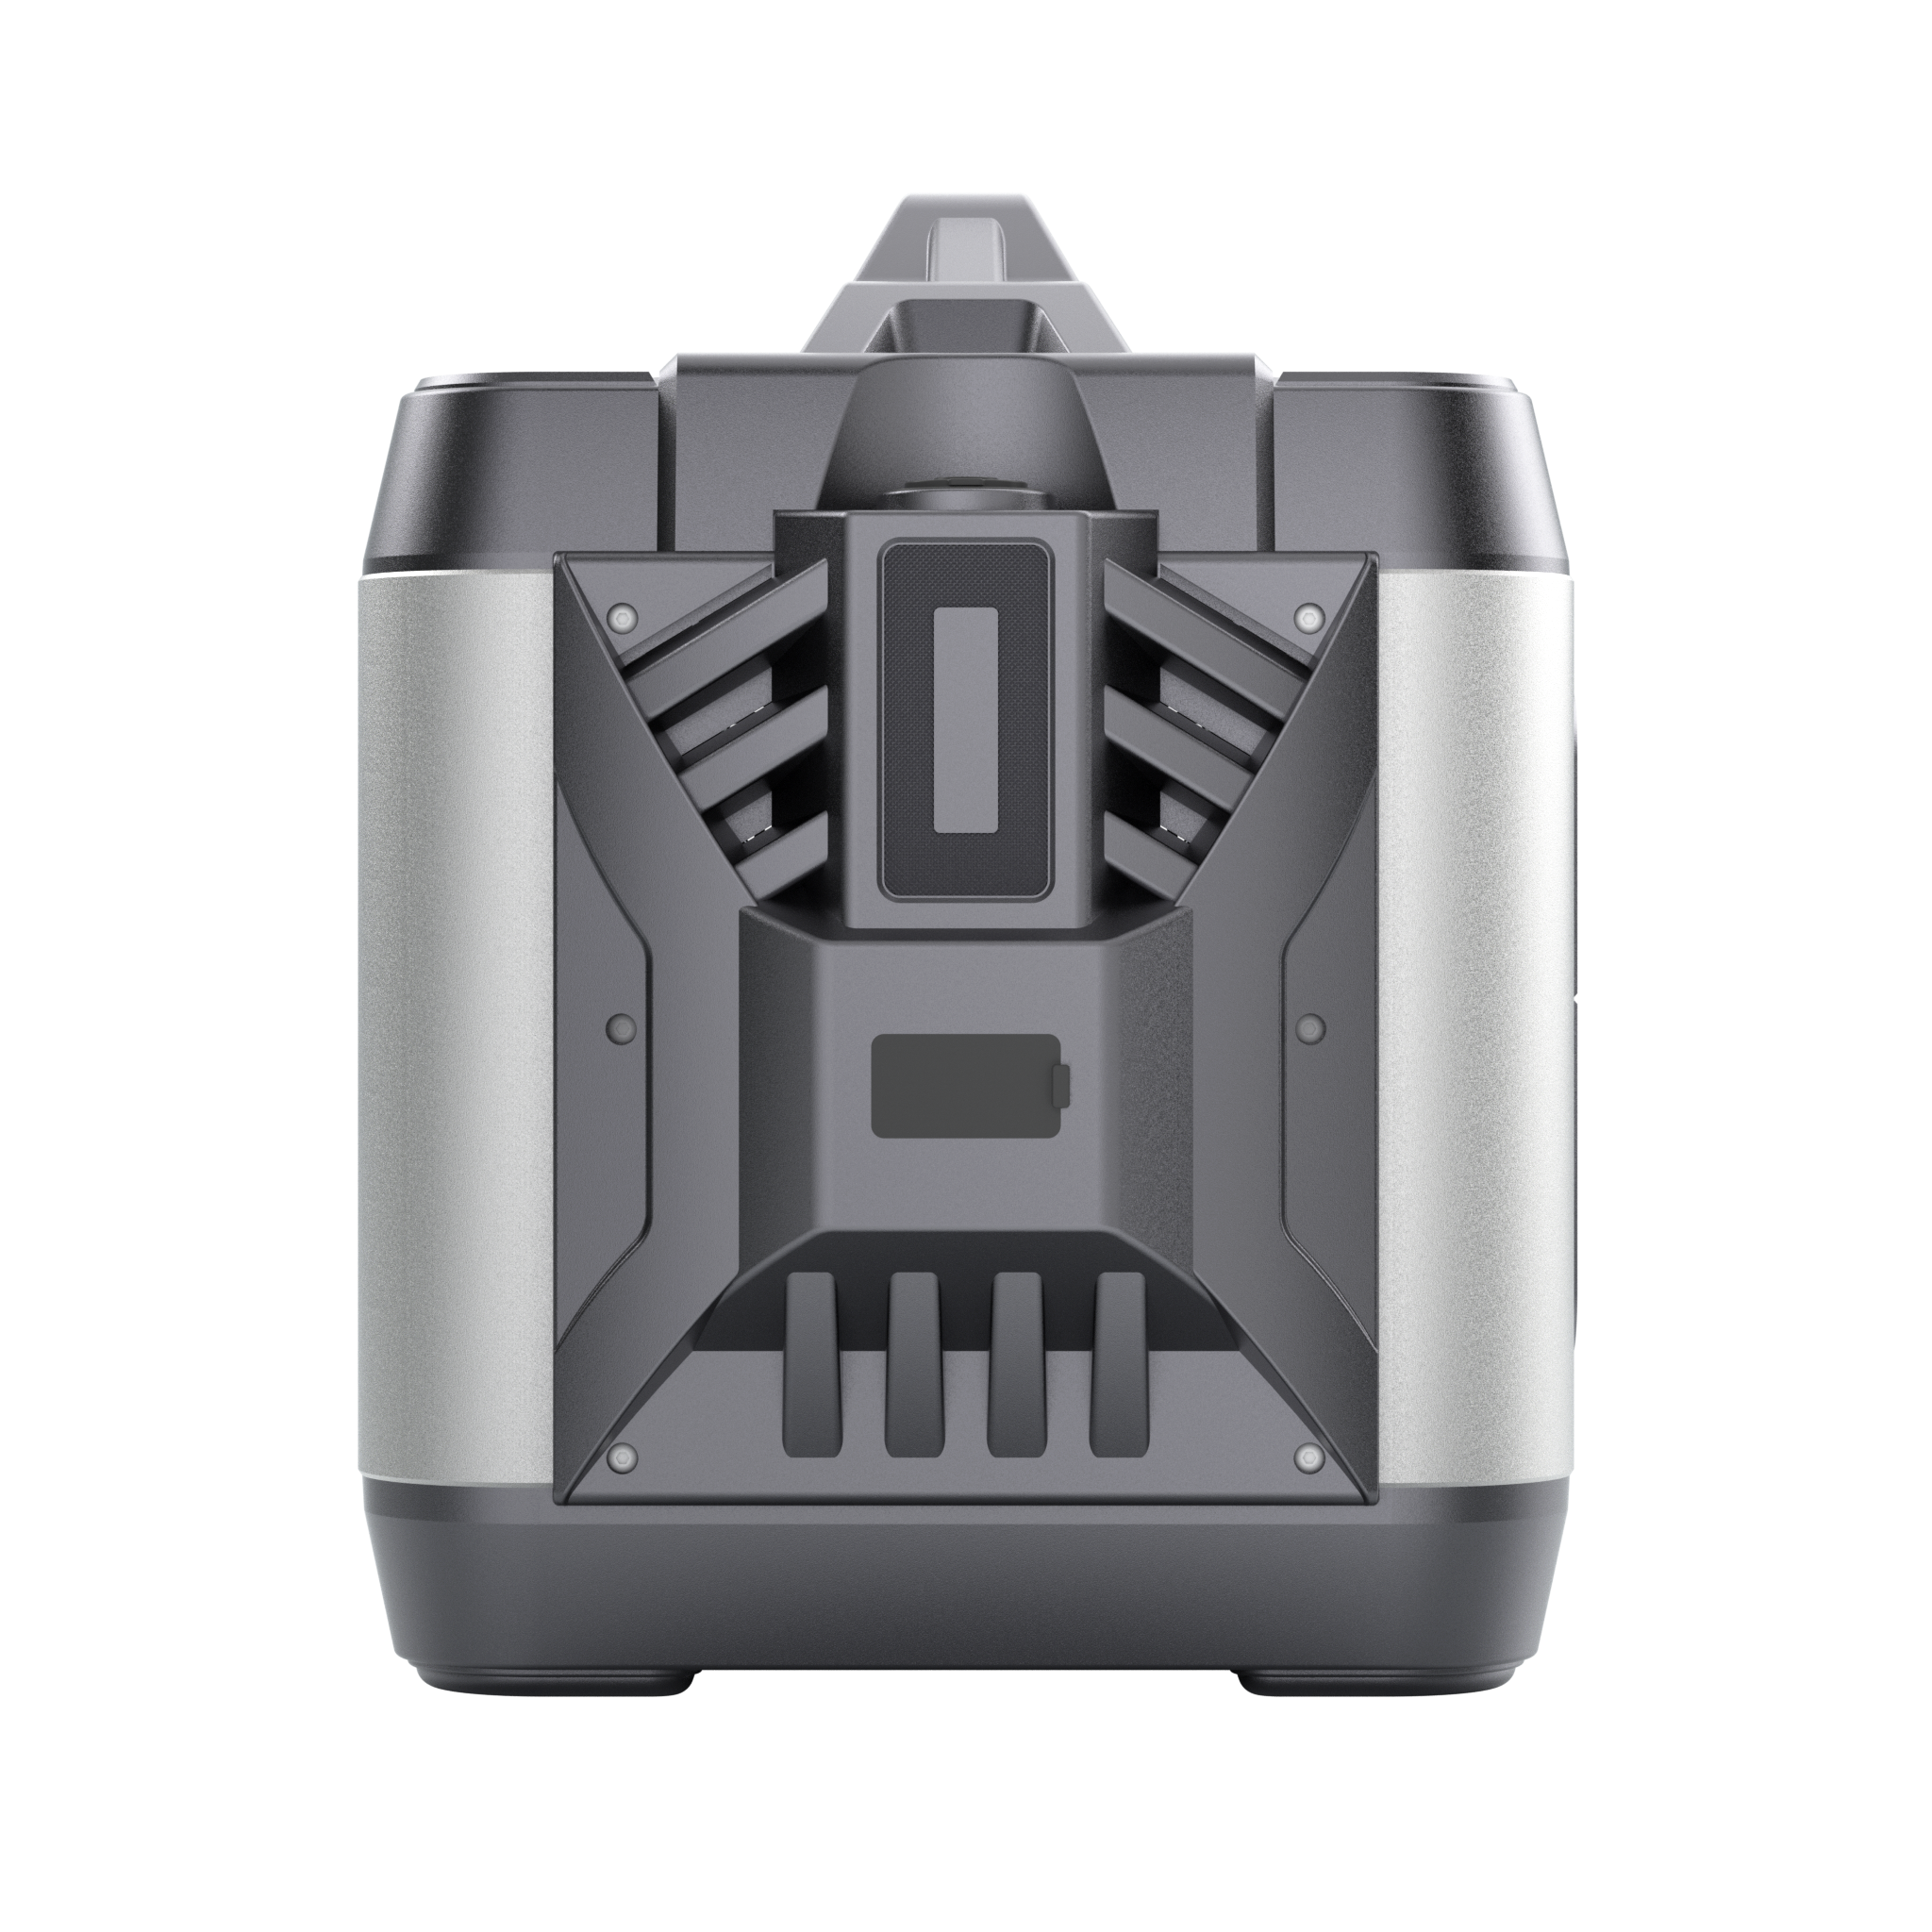 POWEREPUBLIC T3000 portable power station, 3000W 3200Wh,  metallic gray aluminum-alloy body with aircraft wing design, a car charger, an Anderson port, and a handle.